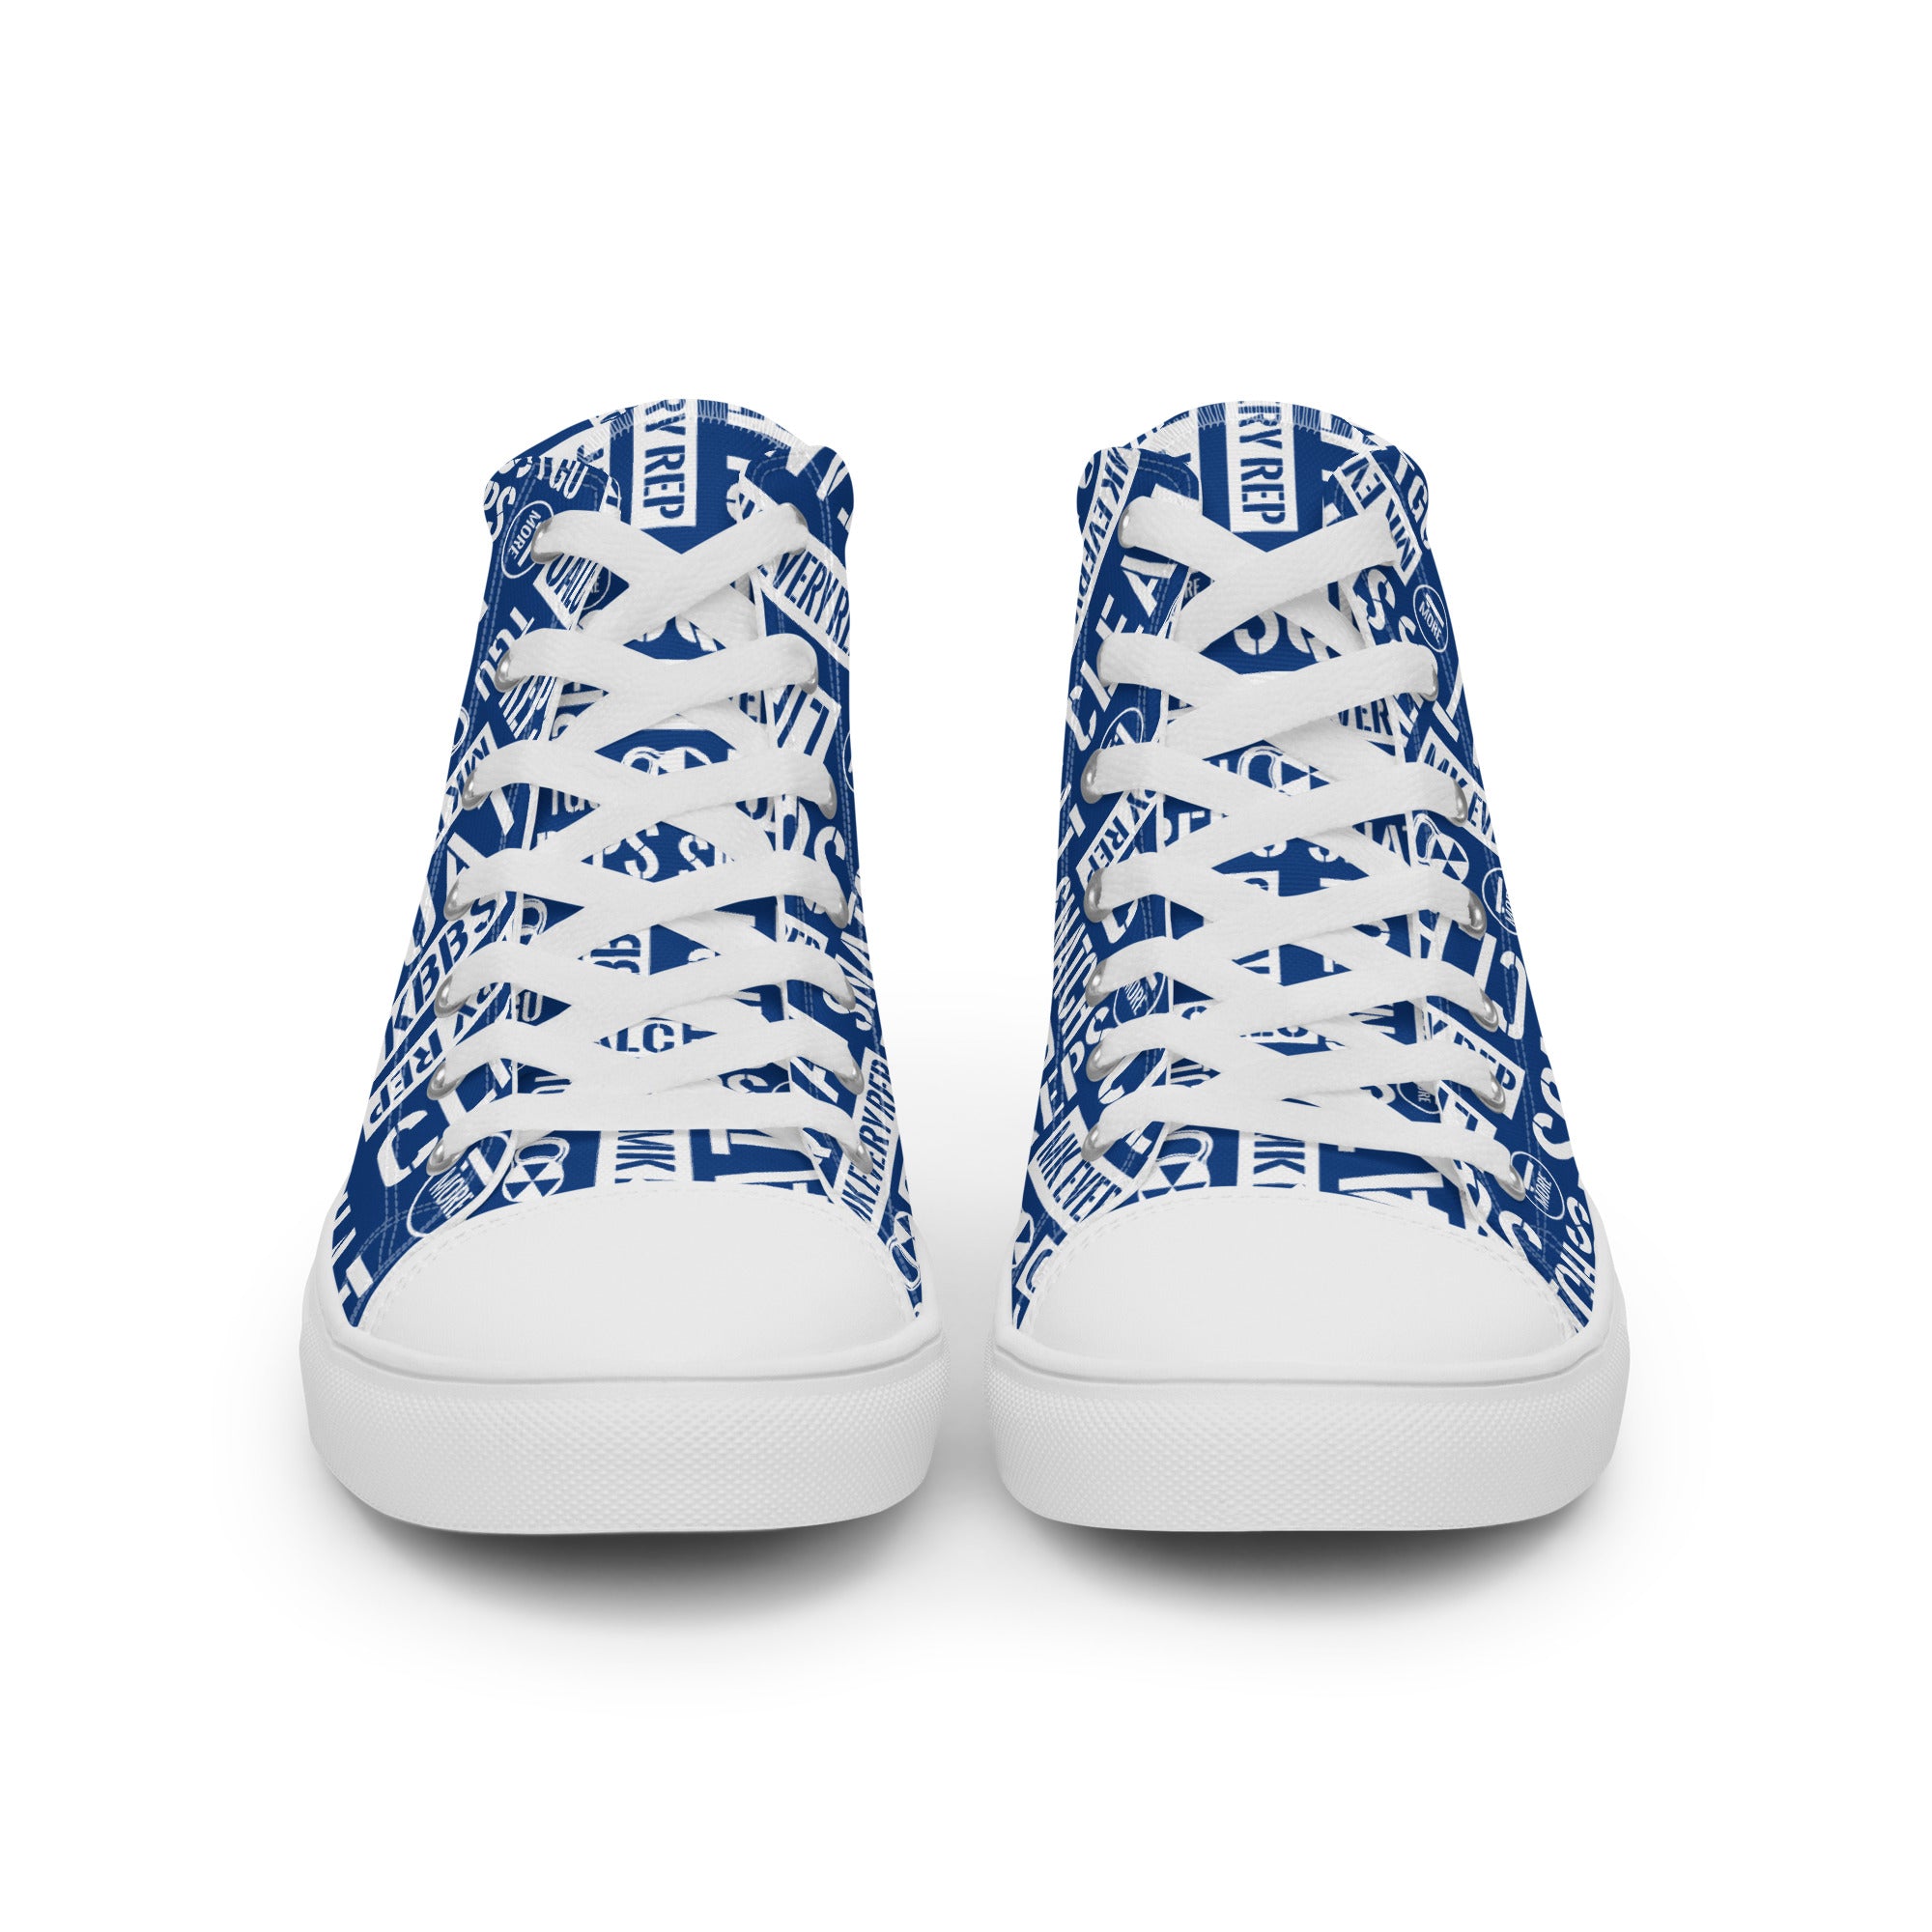 Blue/White Acronyms Women’s High Tops